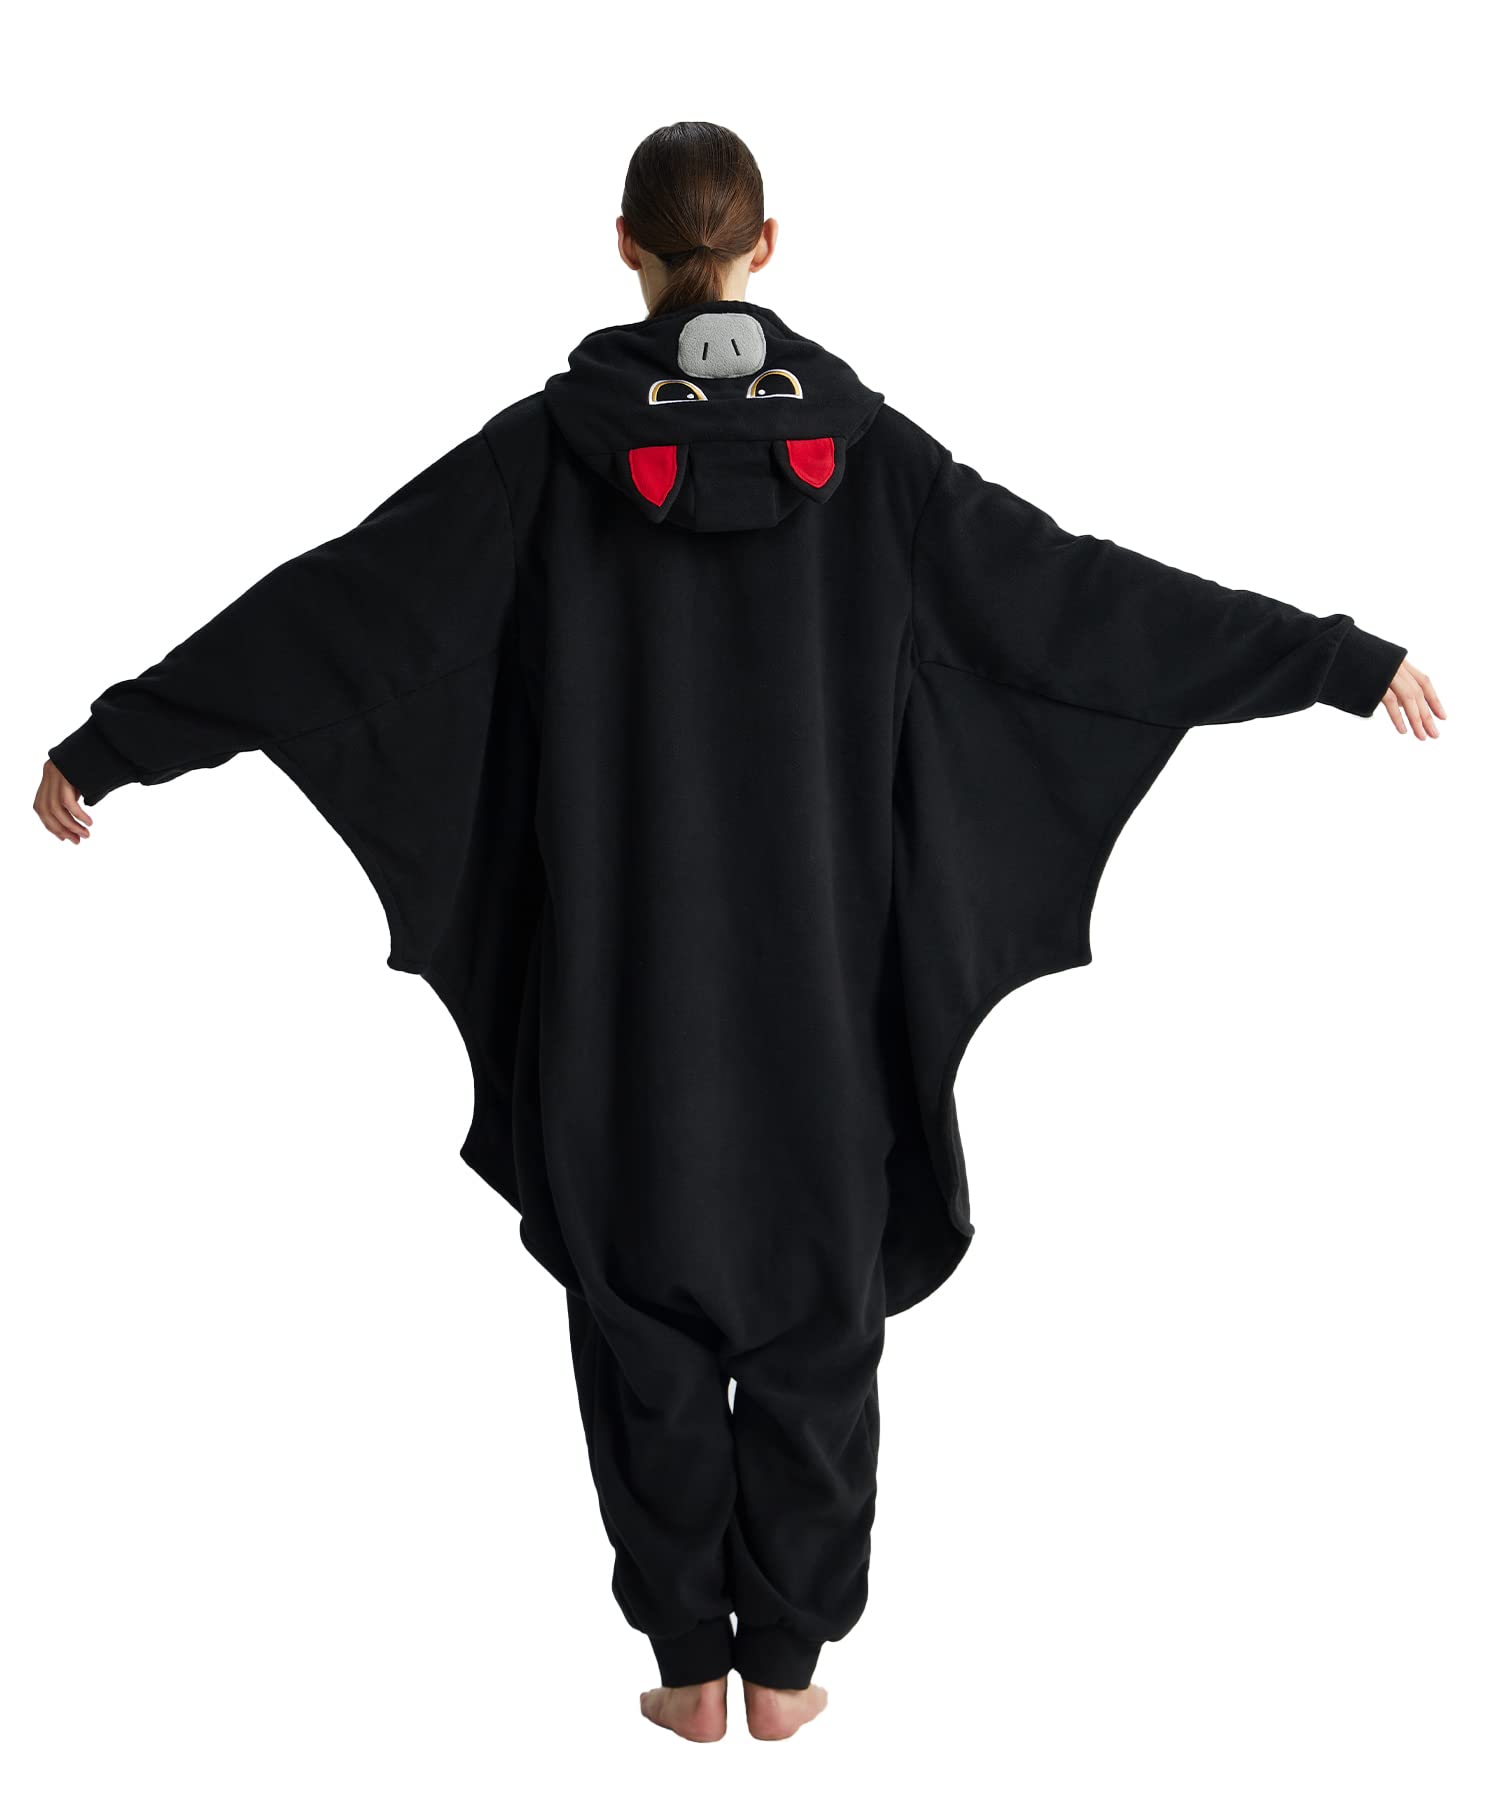 Kgromfy Black Bat Onesie Adult Halloween Animal Cosplay Outfits One Piece Costumes Party Jumpsuit Homewear M